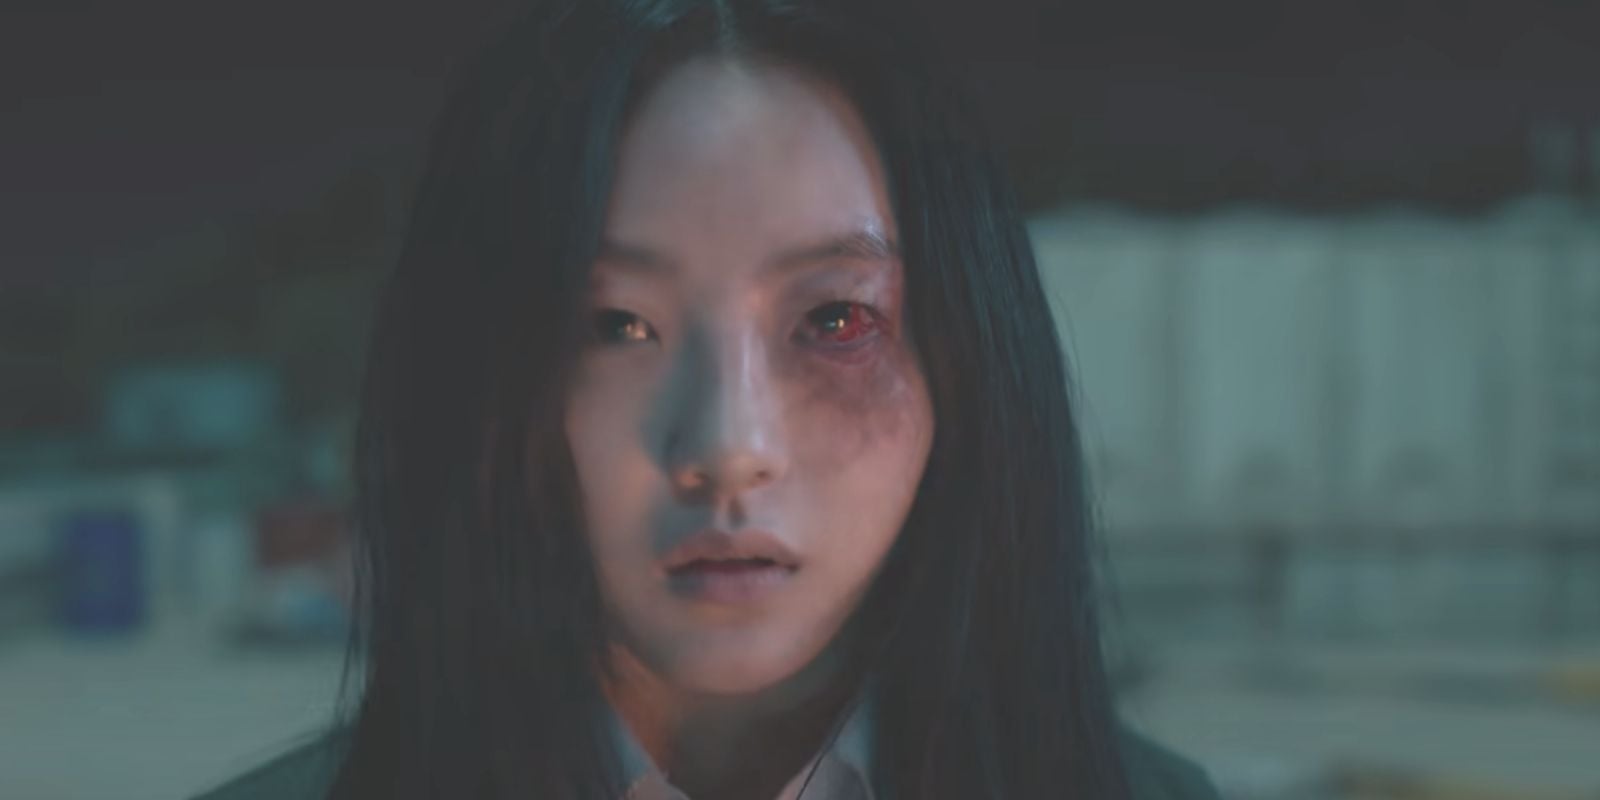 In 'All of Us Are Dead,' you'll see more of 'Squid Game' actor Lee Yoo Mi  this time as a villain